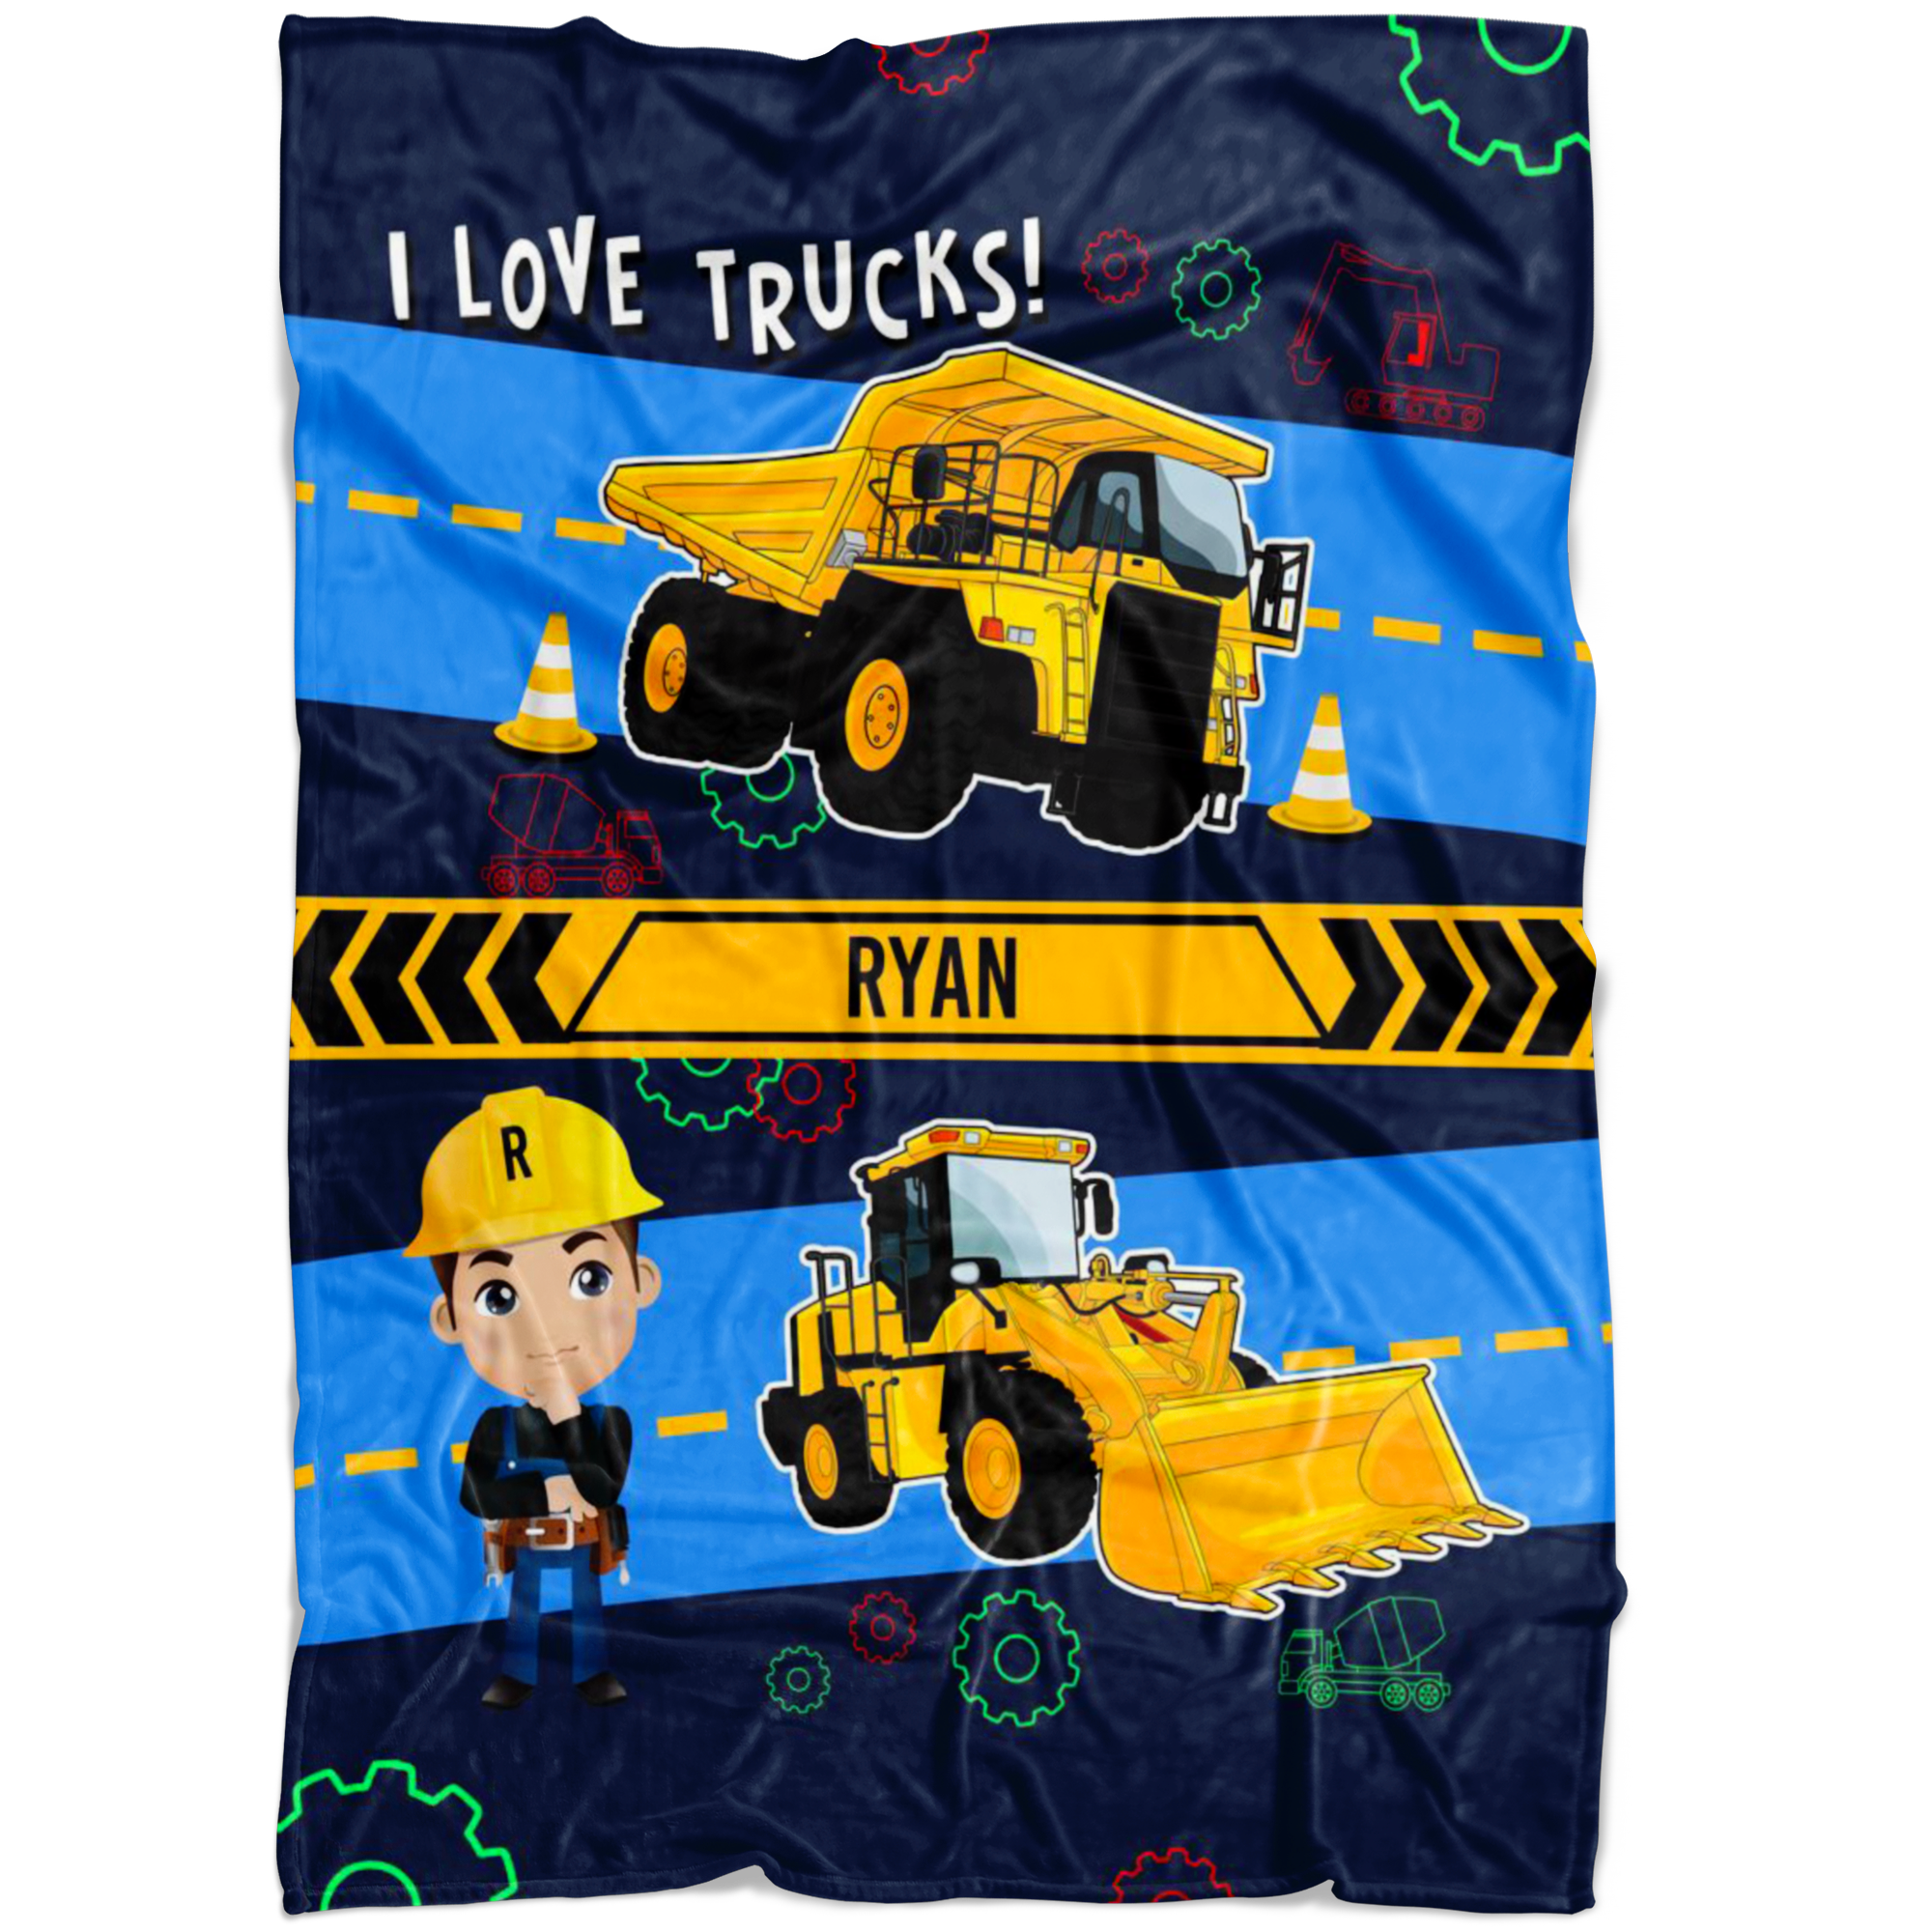 Personalized Name I Love Trucks Blanket for Boys & Girls with Character Personalization - RYAN